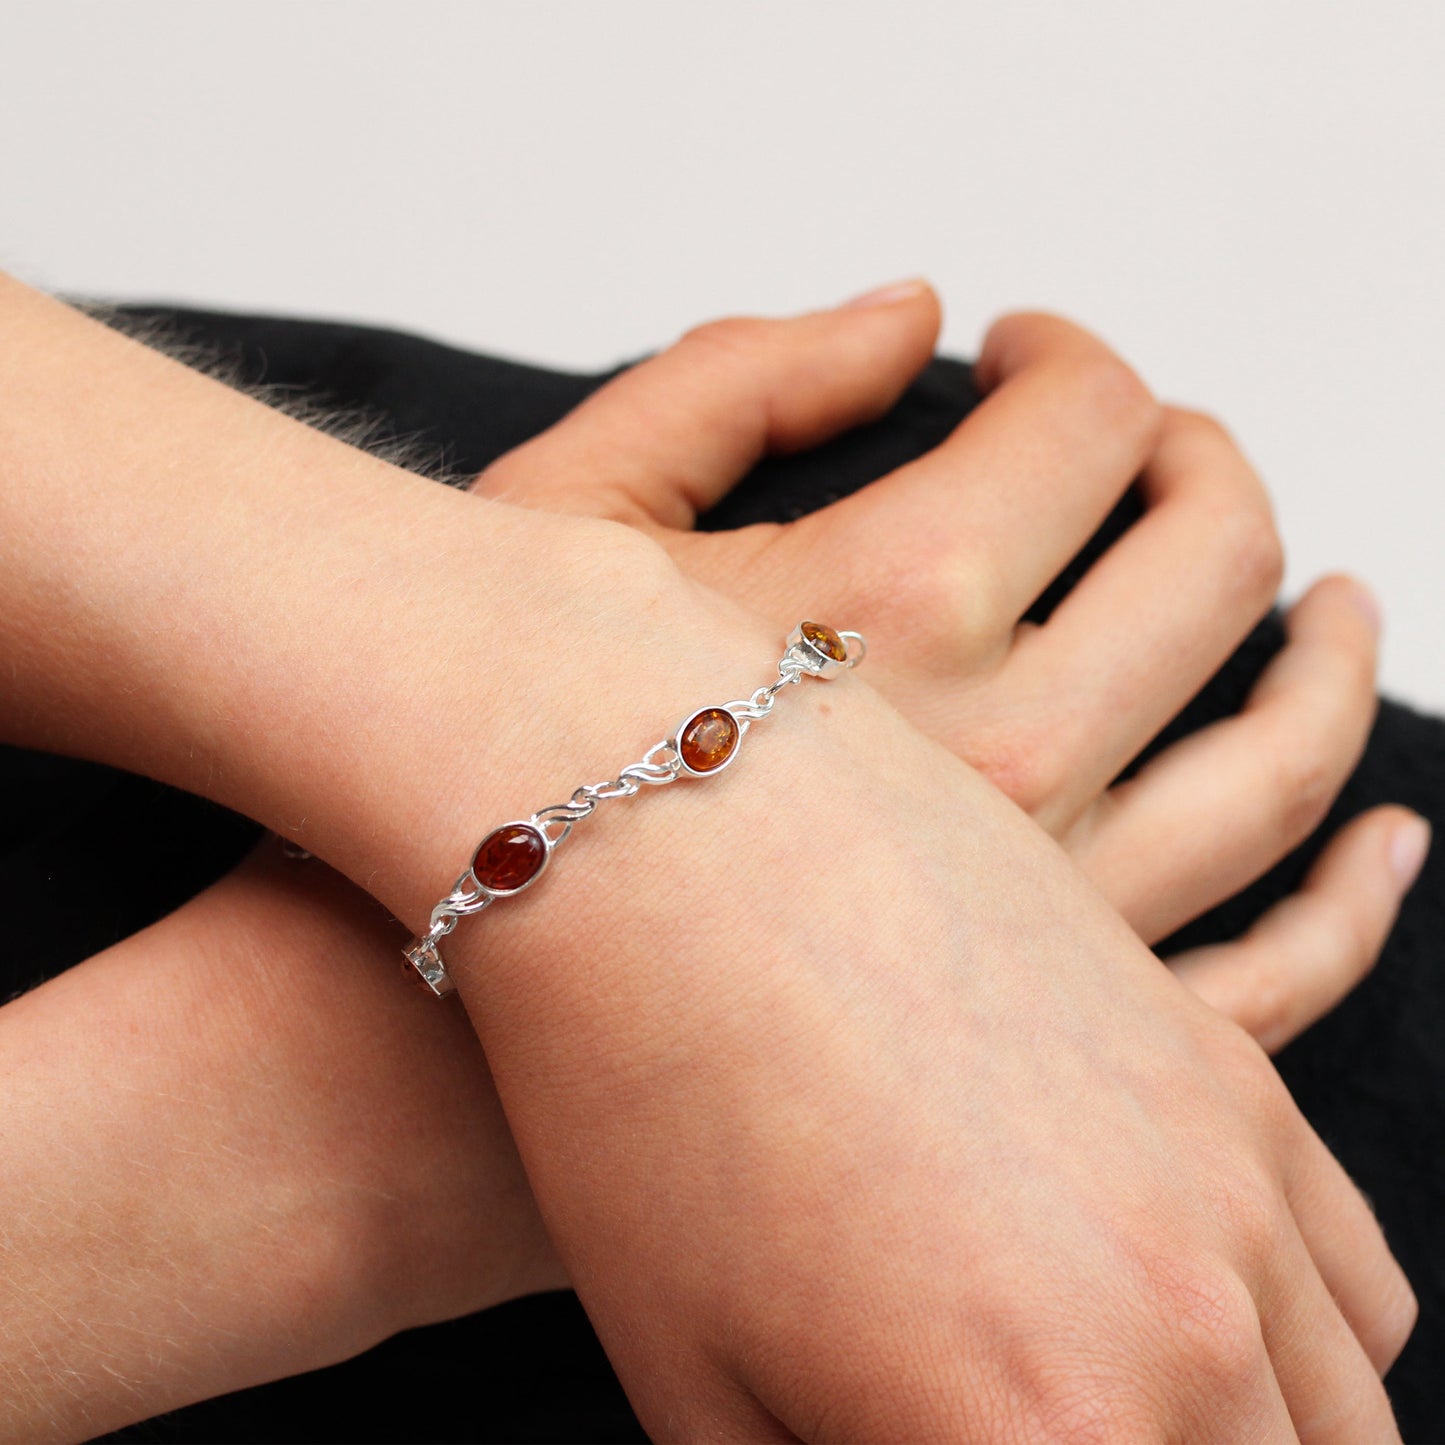 Sterling Silver & Baltic Amber Chain Bracelet